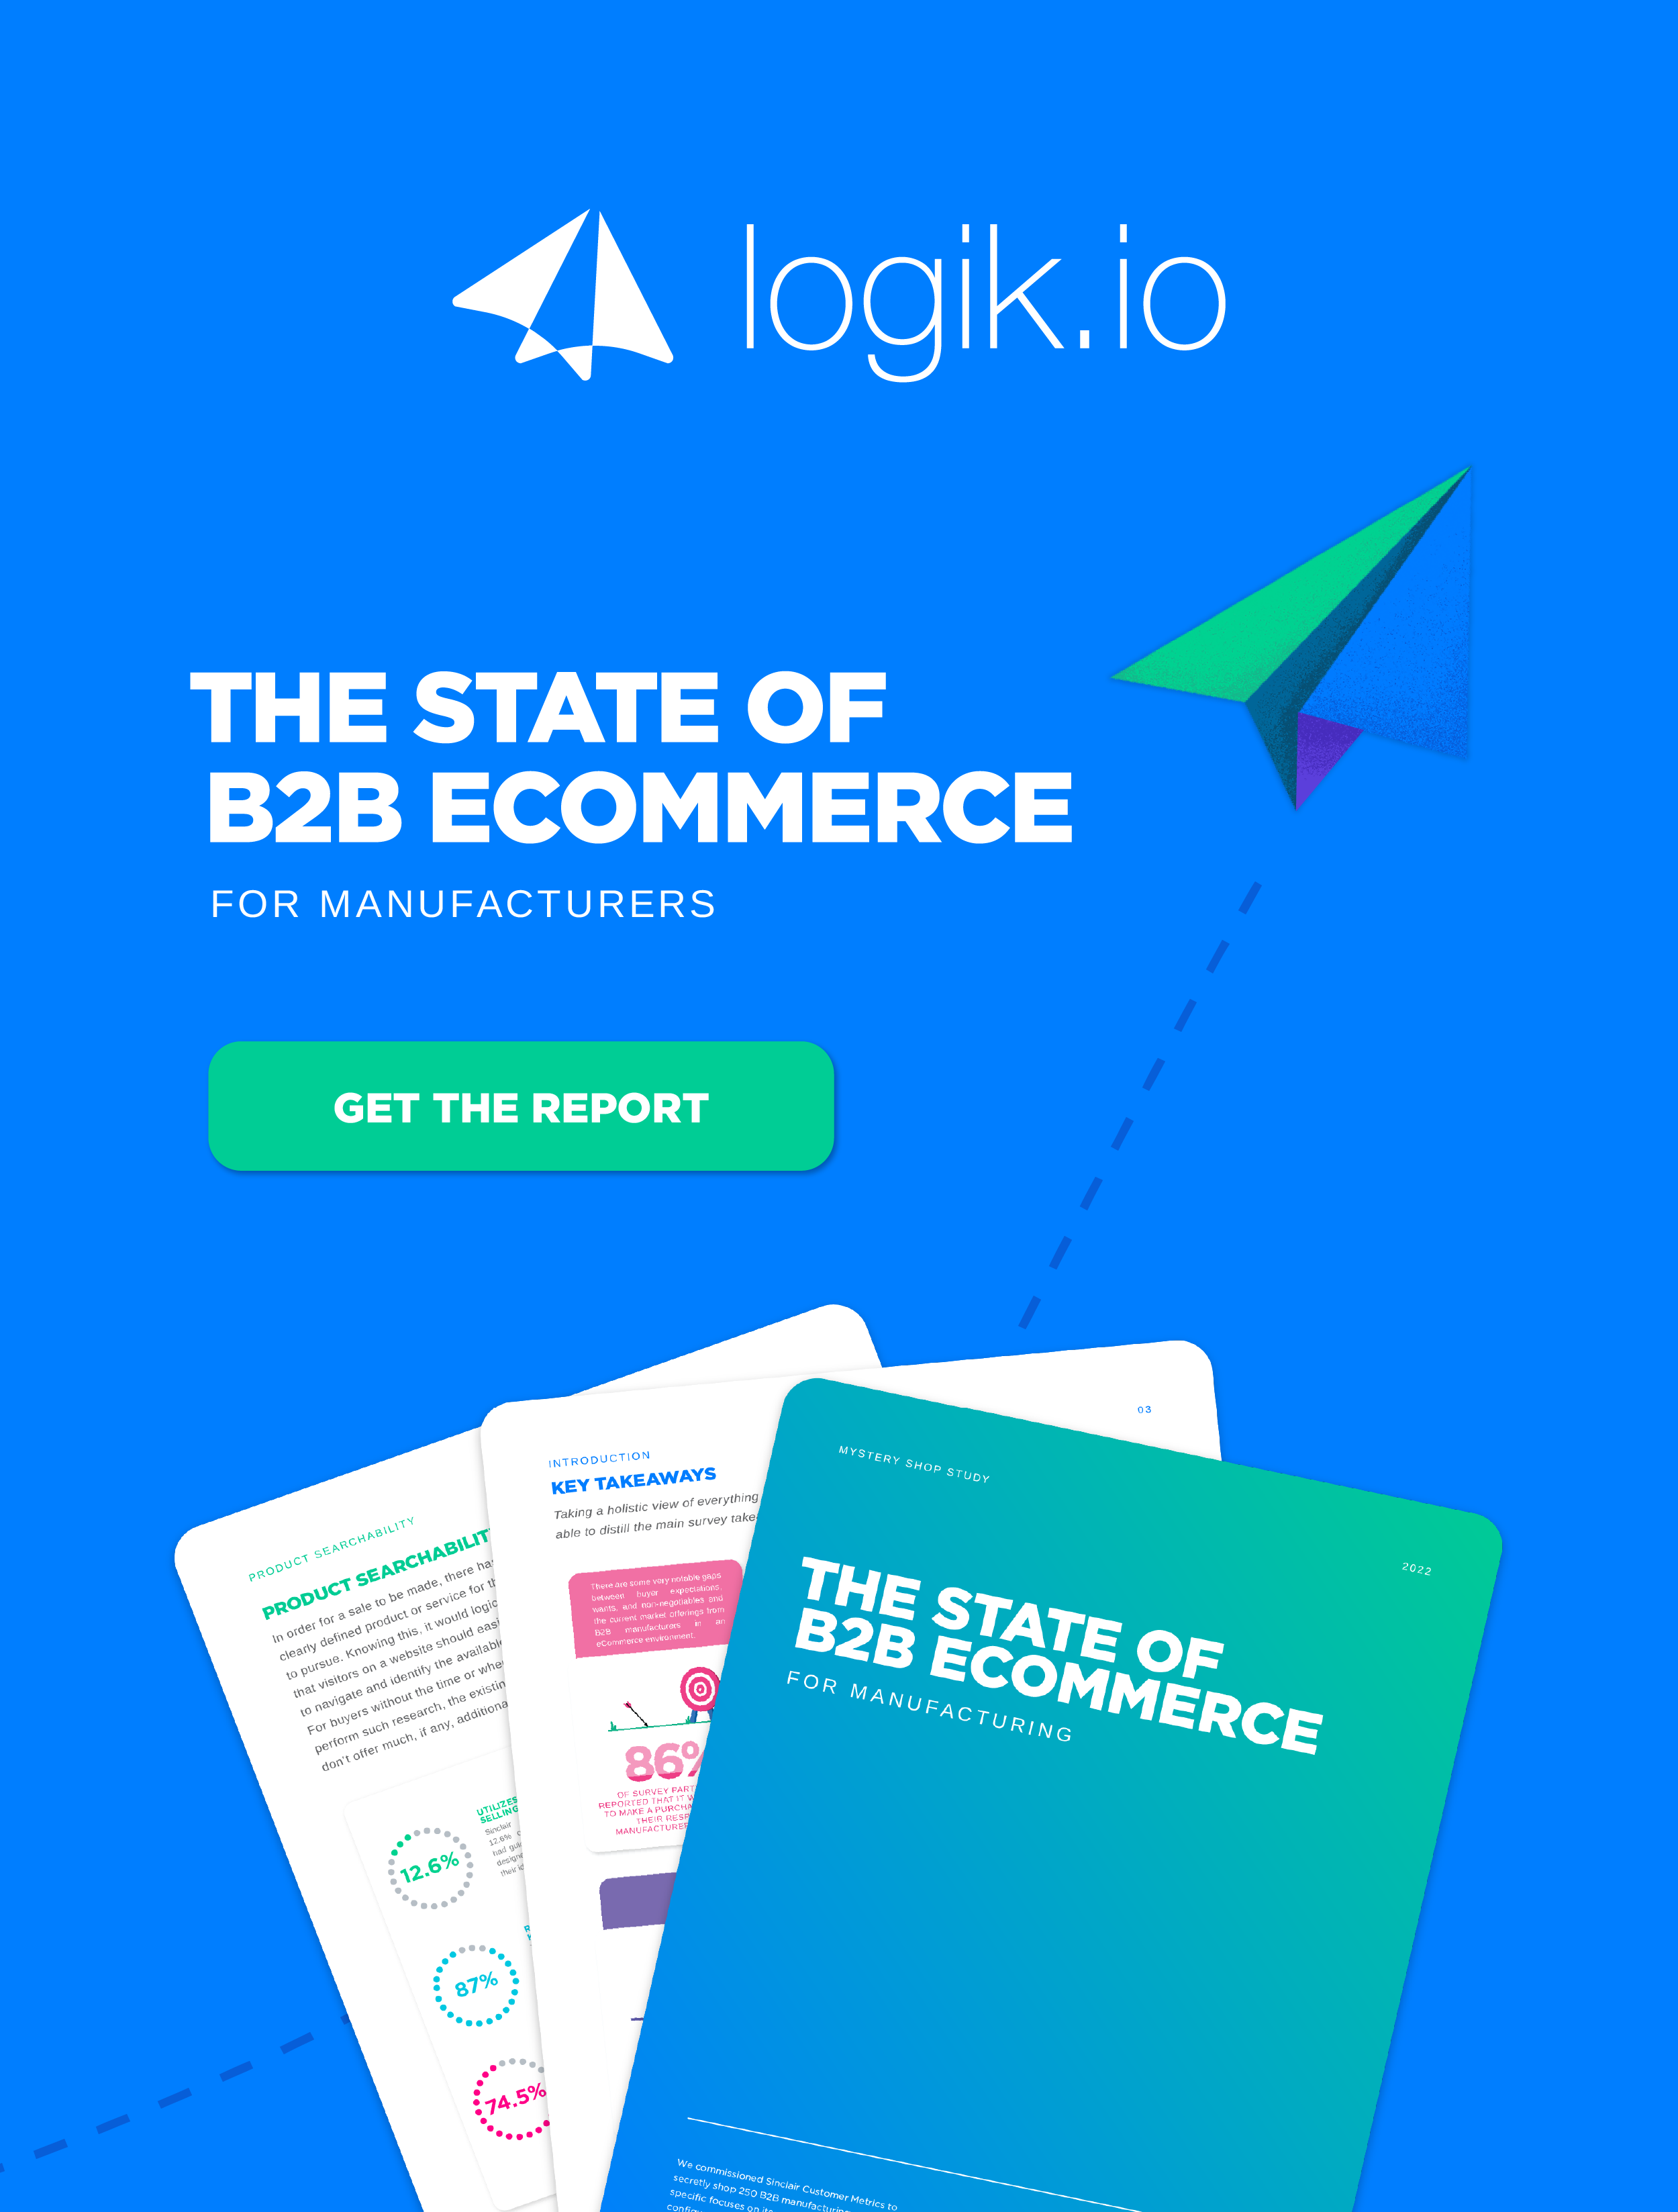 The State of B2B eCommerce for Manufacturers